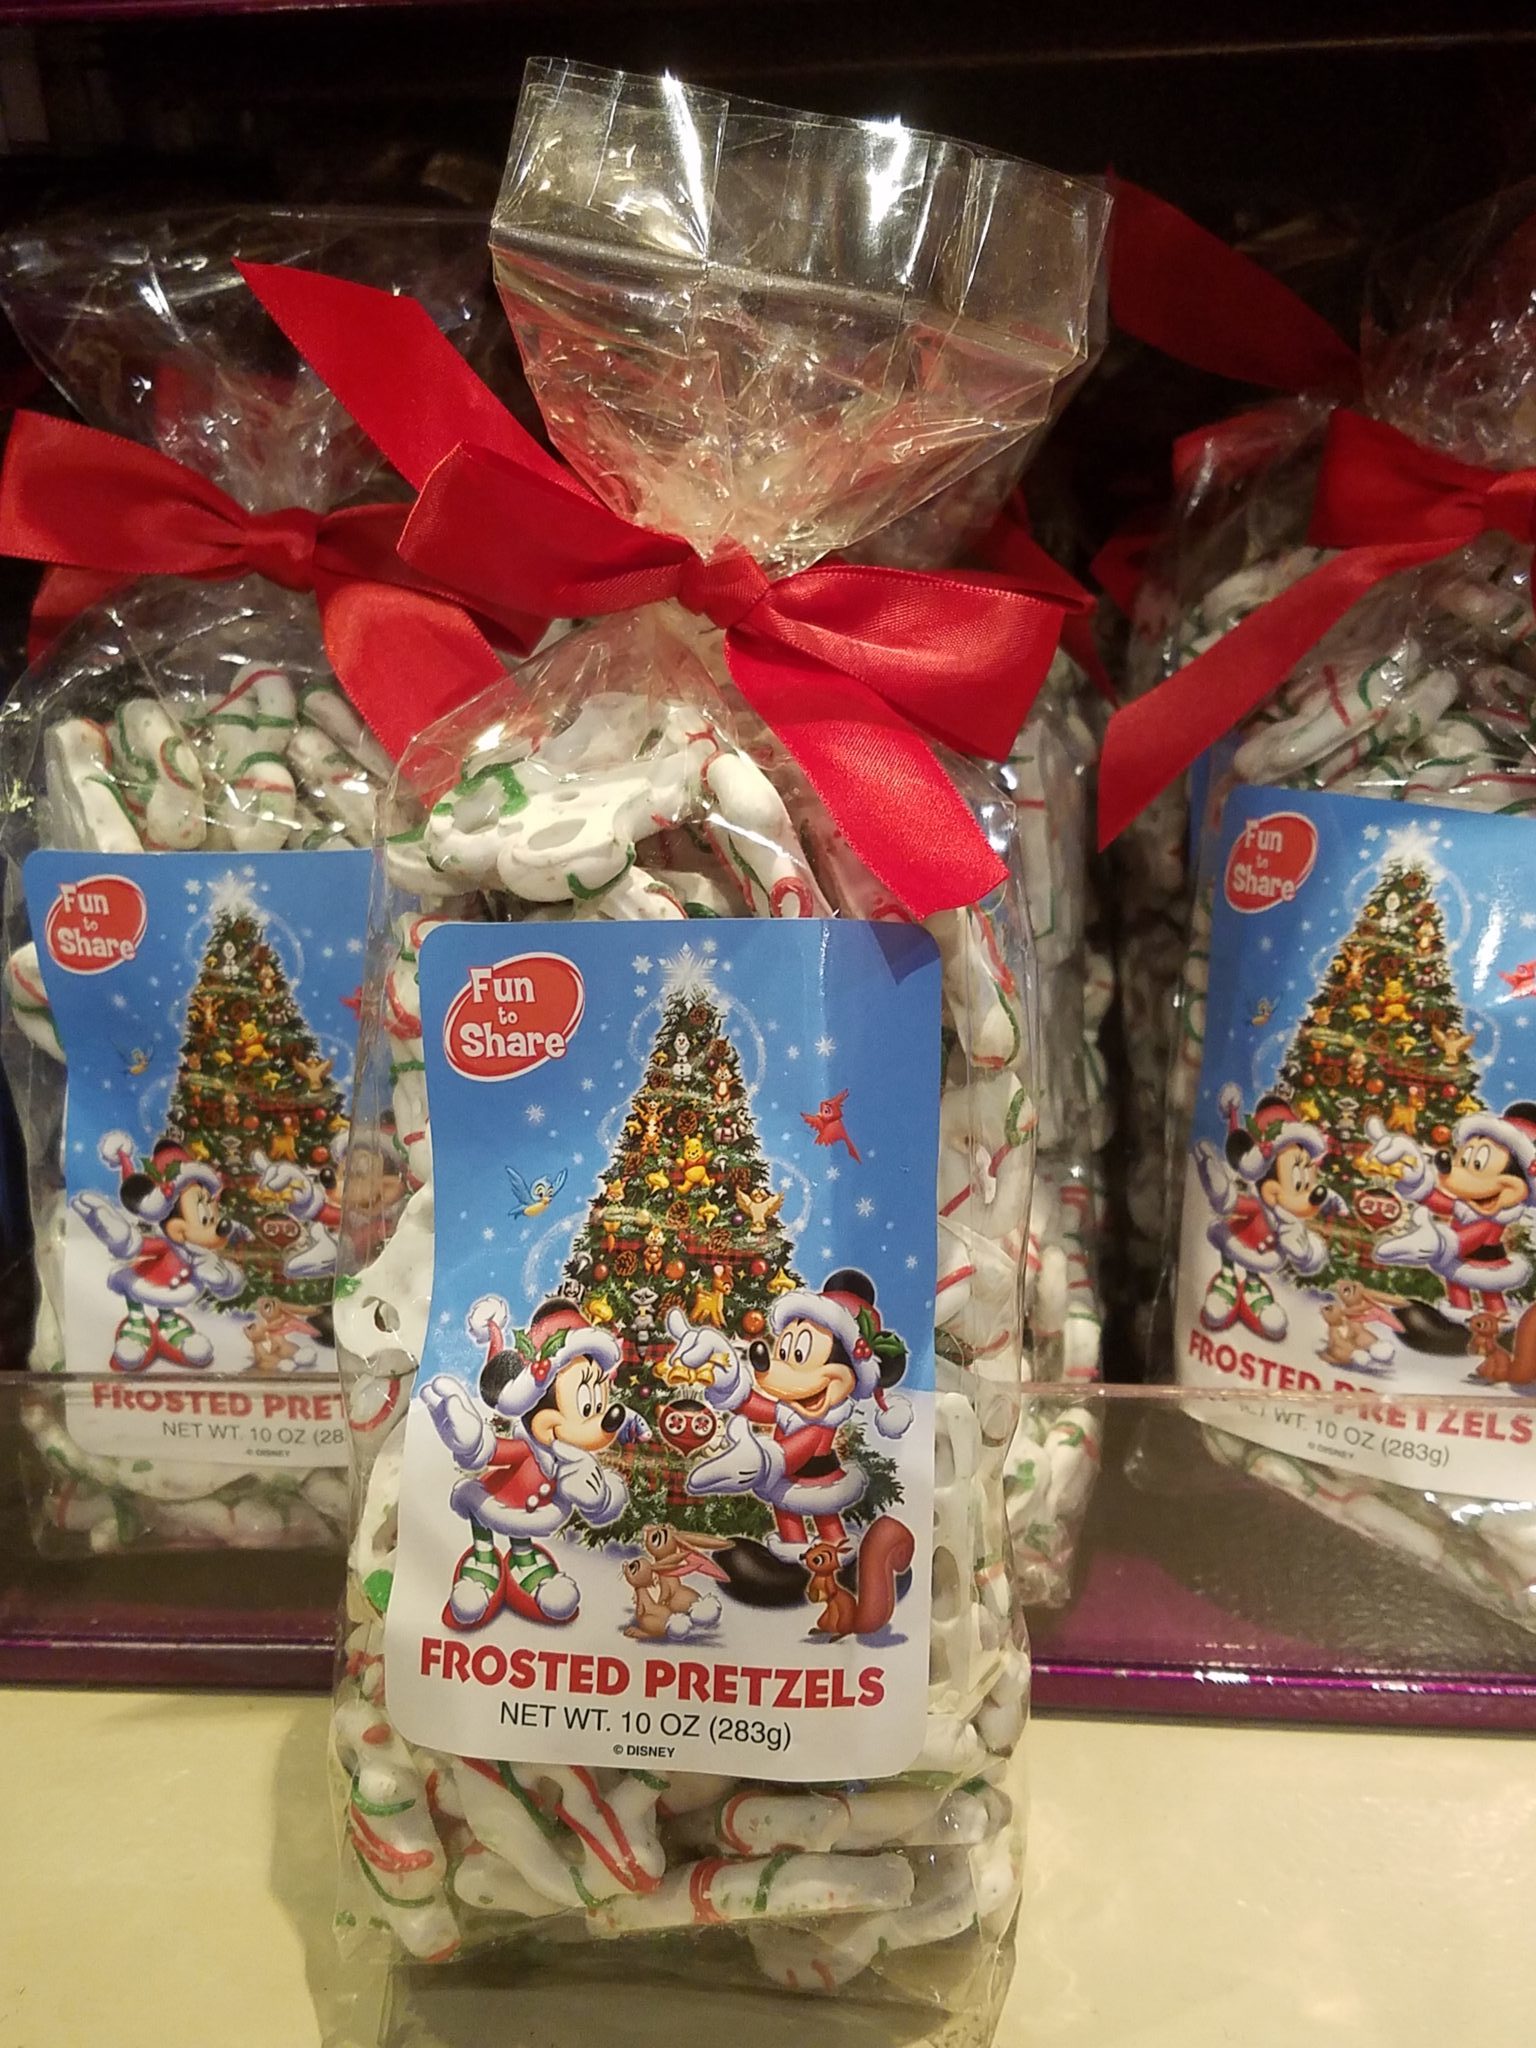 Winter Holiday Sweets Now Available At Select Disney Springs Shops